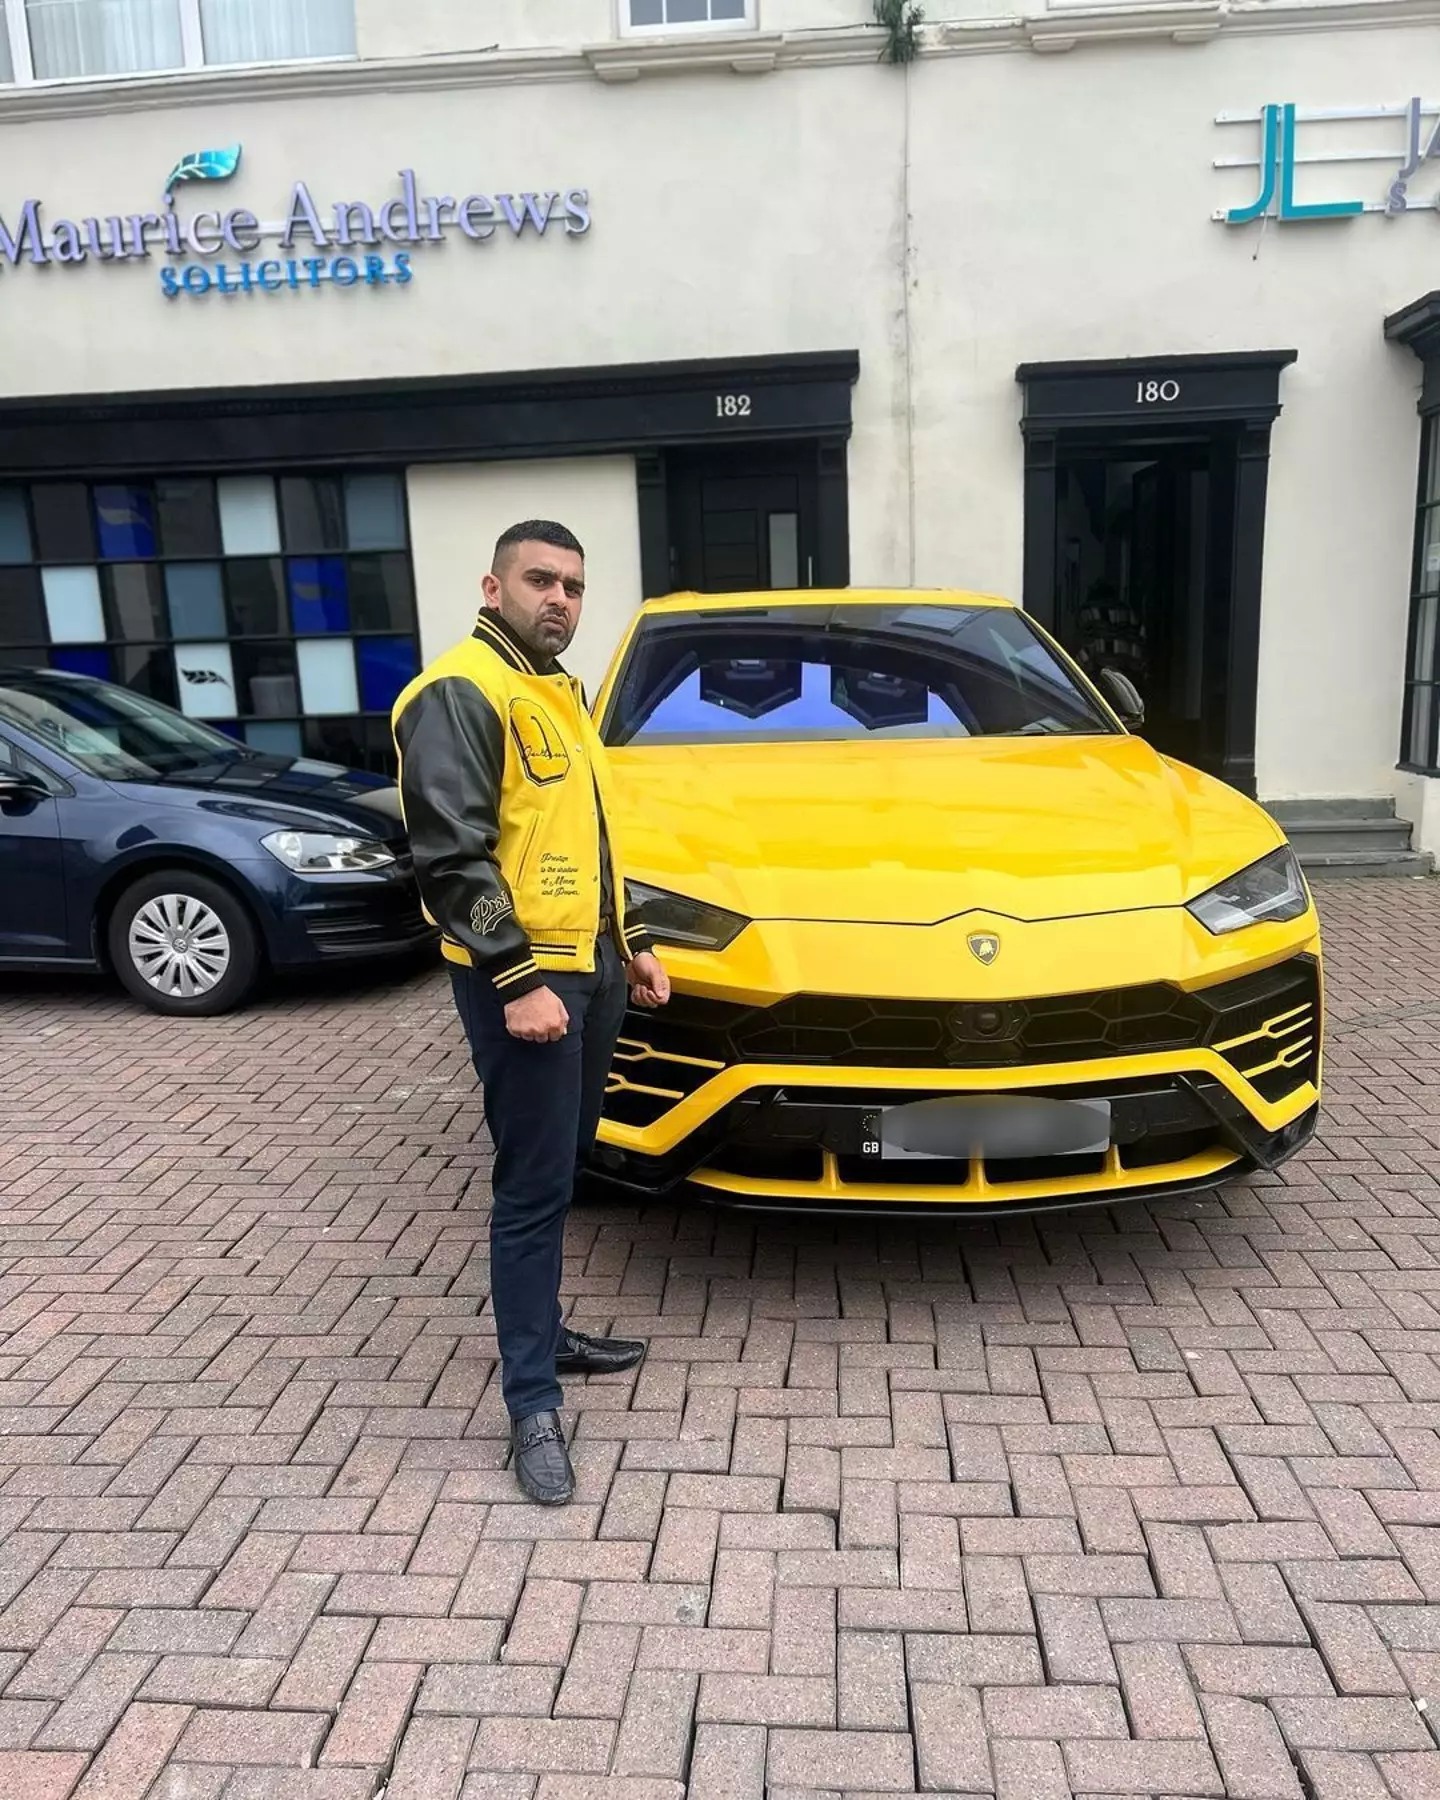 Akhmed Yakoob has an impressive car collection worth £1 million after being told he was a 'good for nothing'.